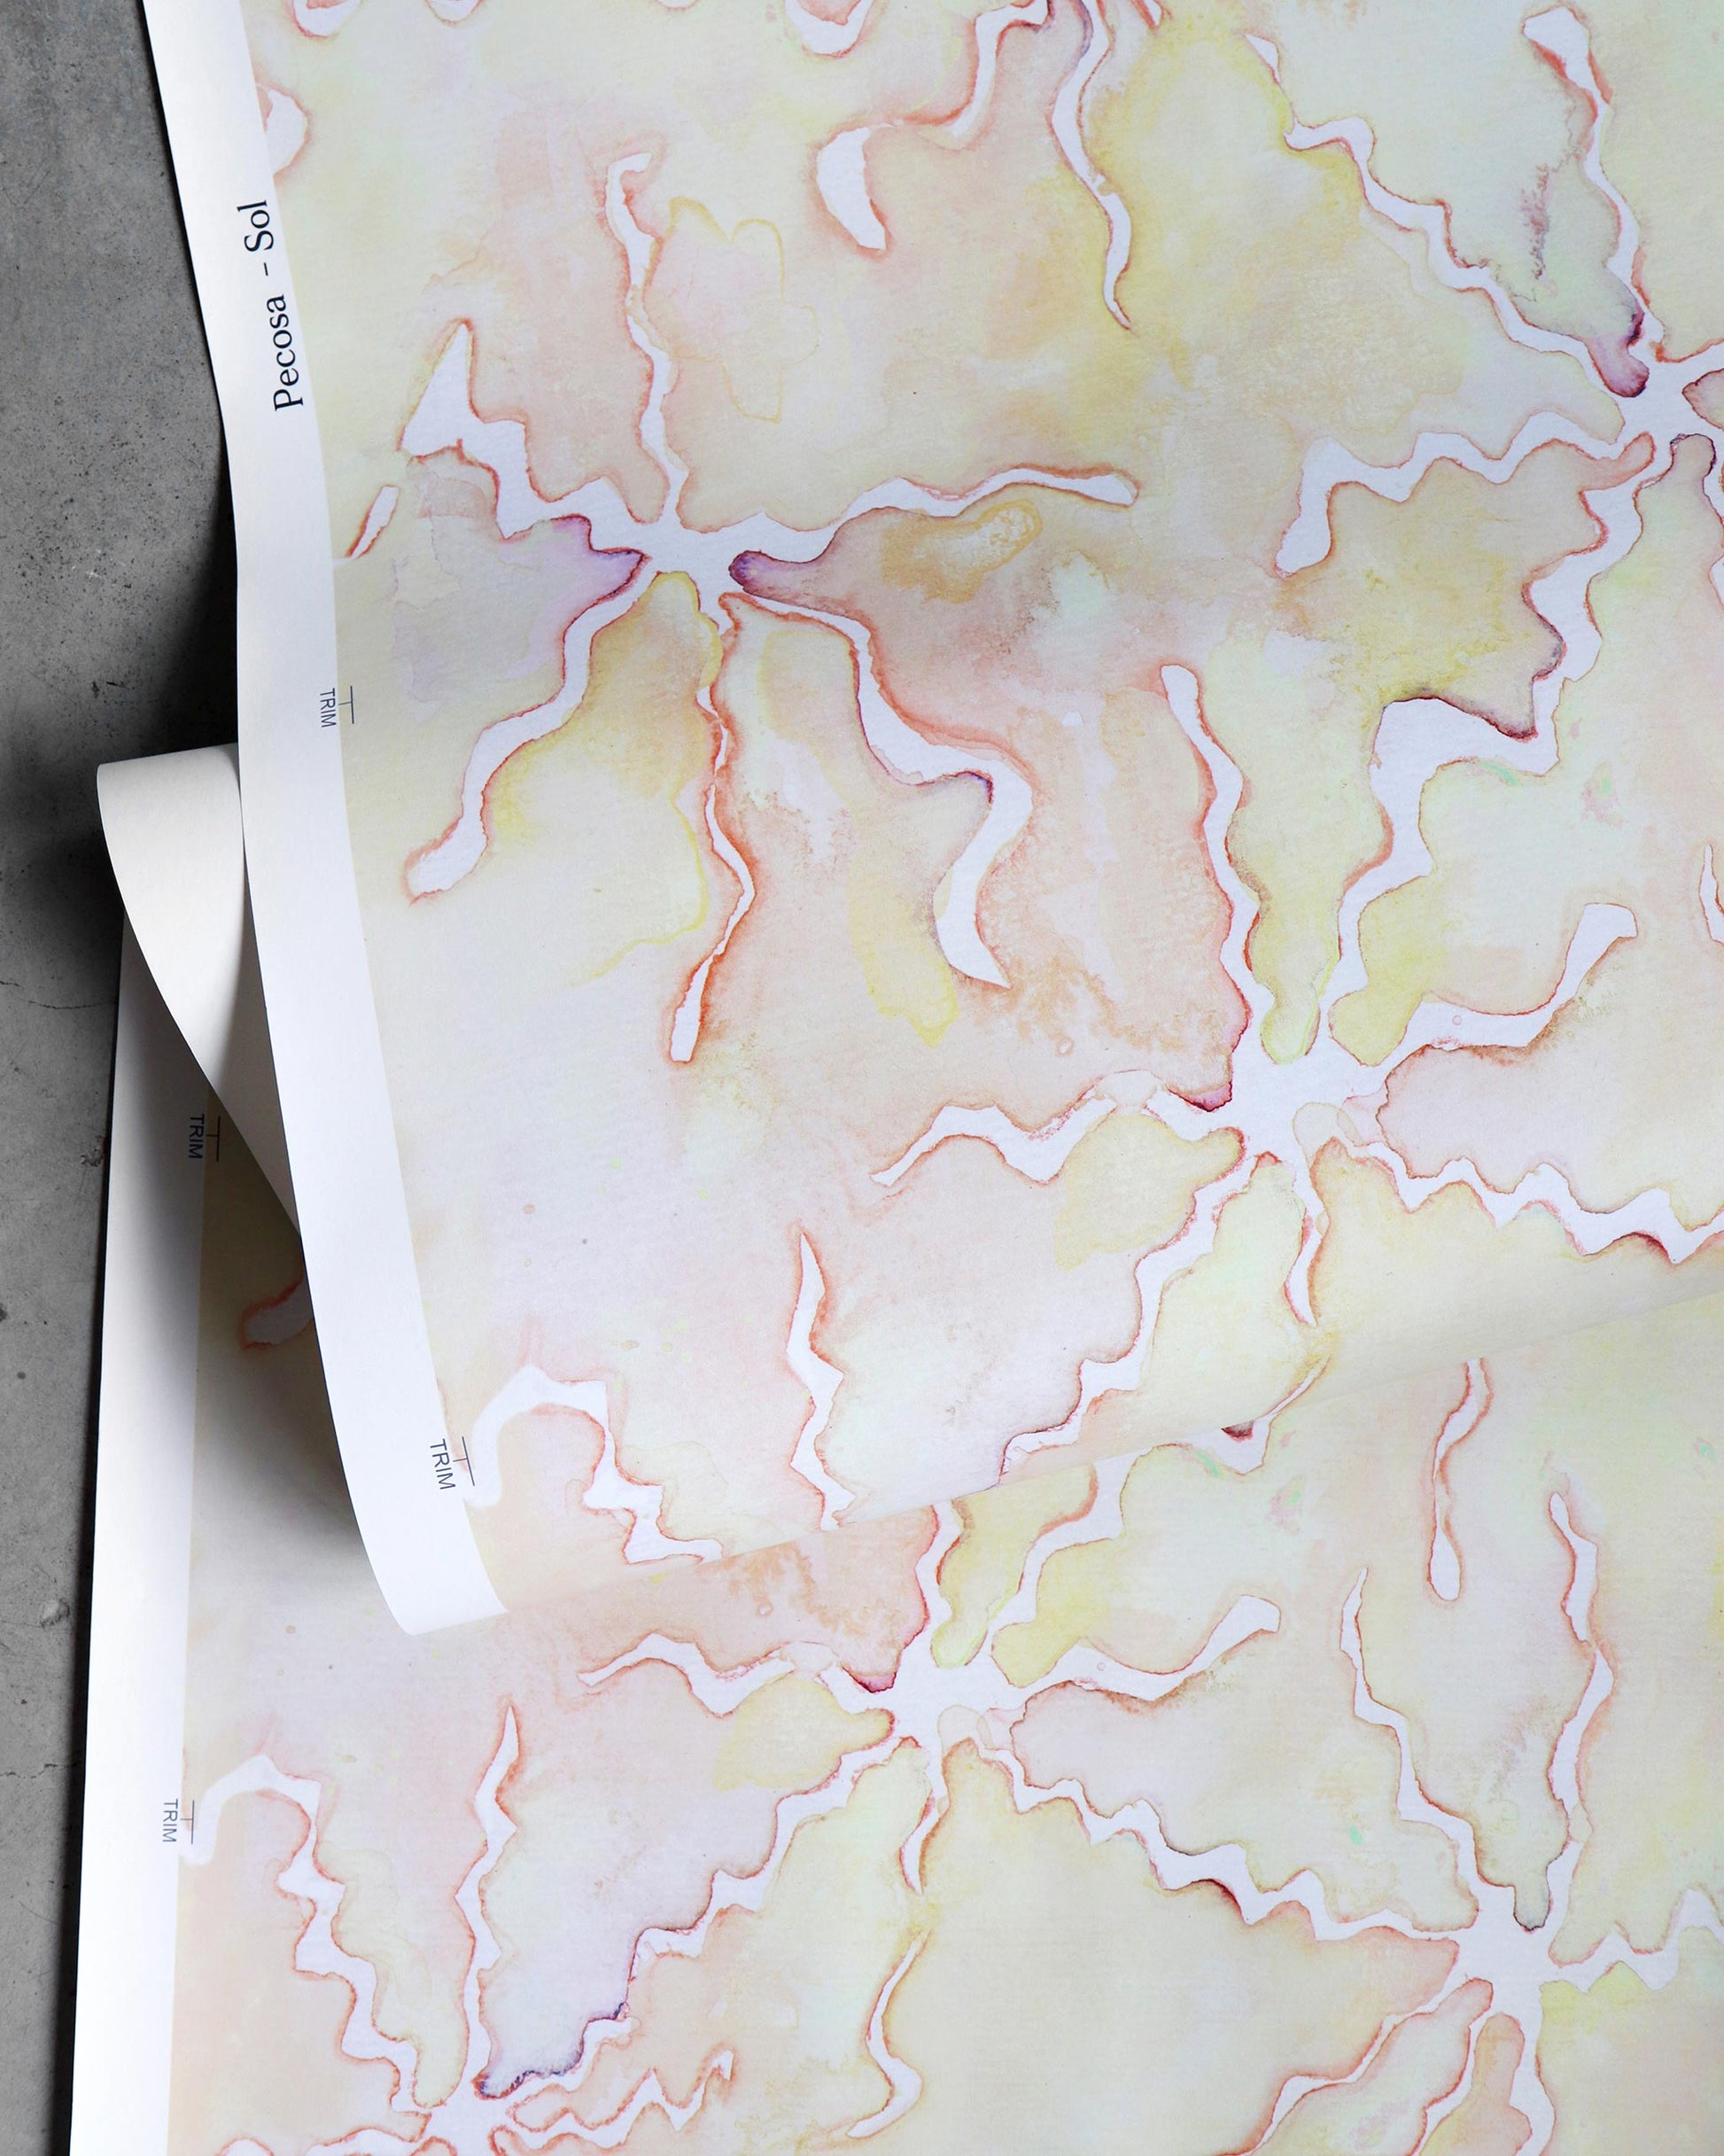 A piece of Pecosa Wallpaper Sol with a pink, yellow, and fabric design on it